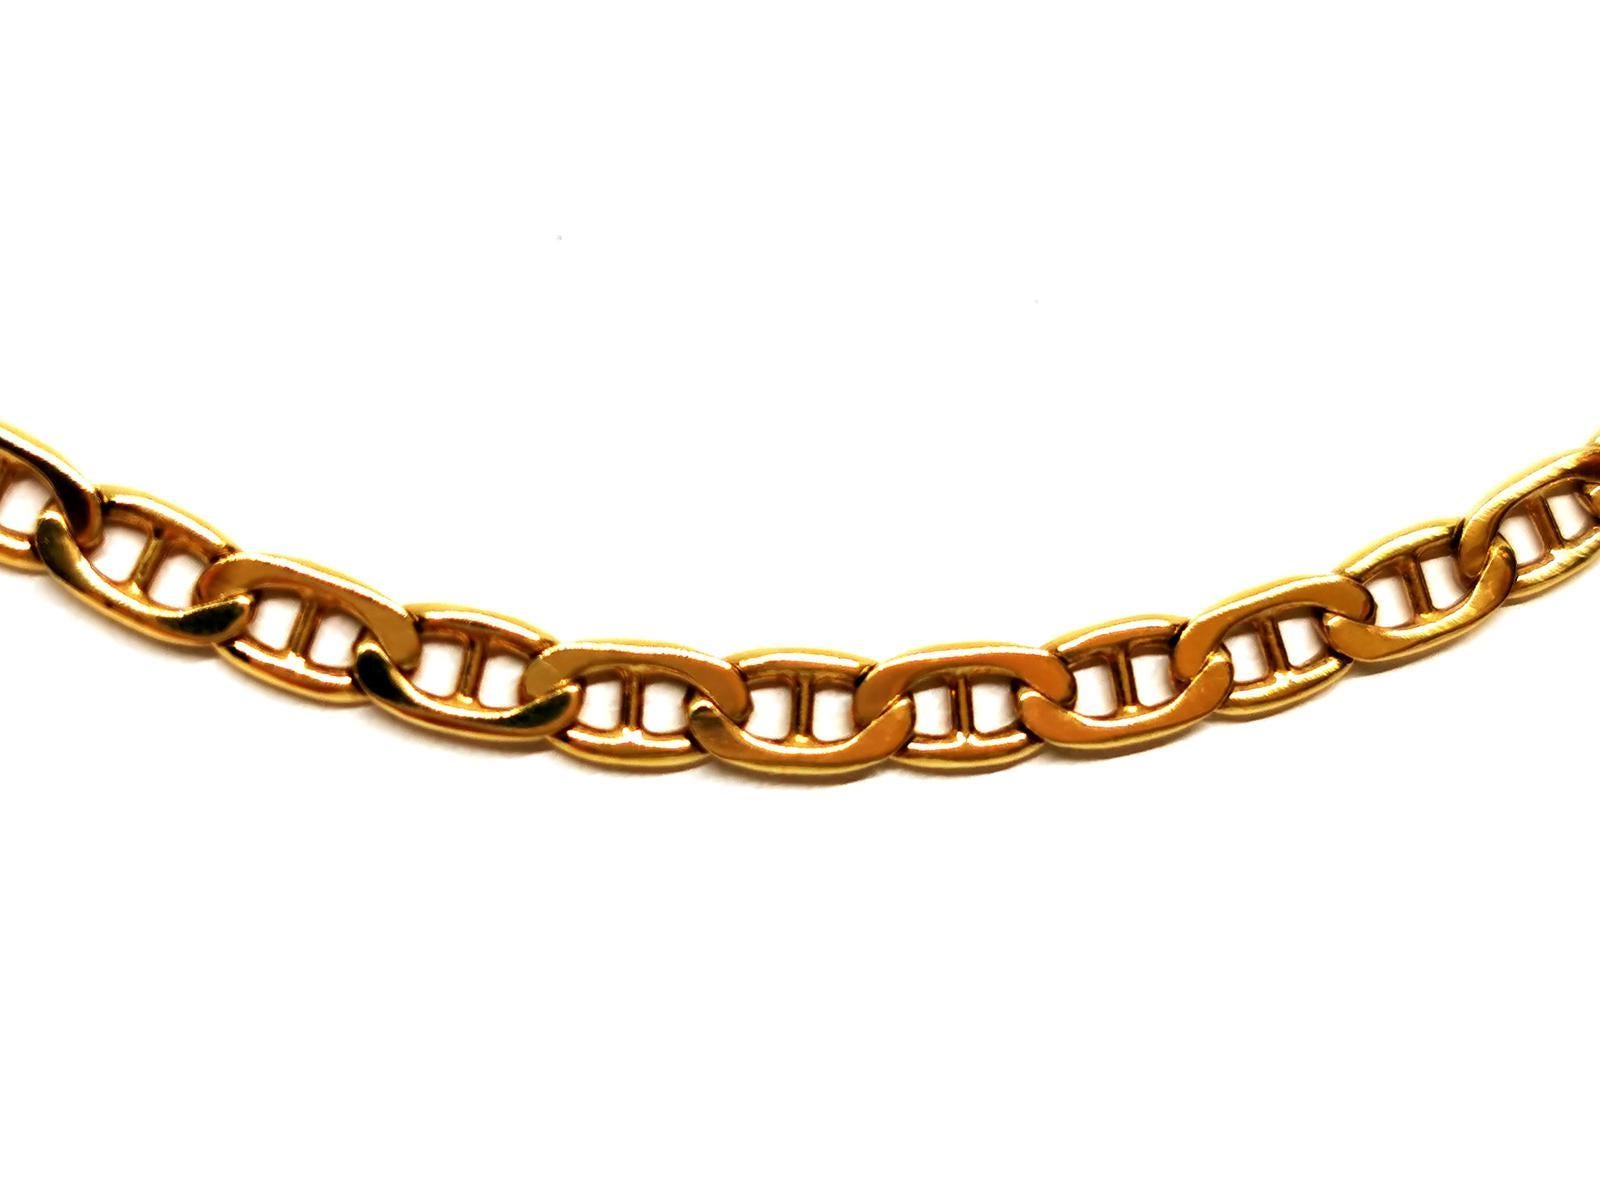 Necklace chain in yellow gold 750 thousandths (18 carats). marine mesh. length: 51.5 cm. width: 0.35 cm. carabiner clasp. total weight: 16.35g. eagle head hallmark. excellent condition.
